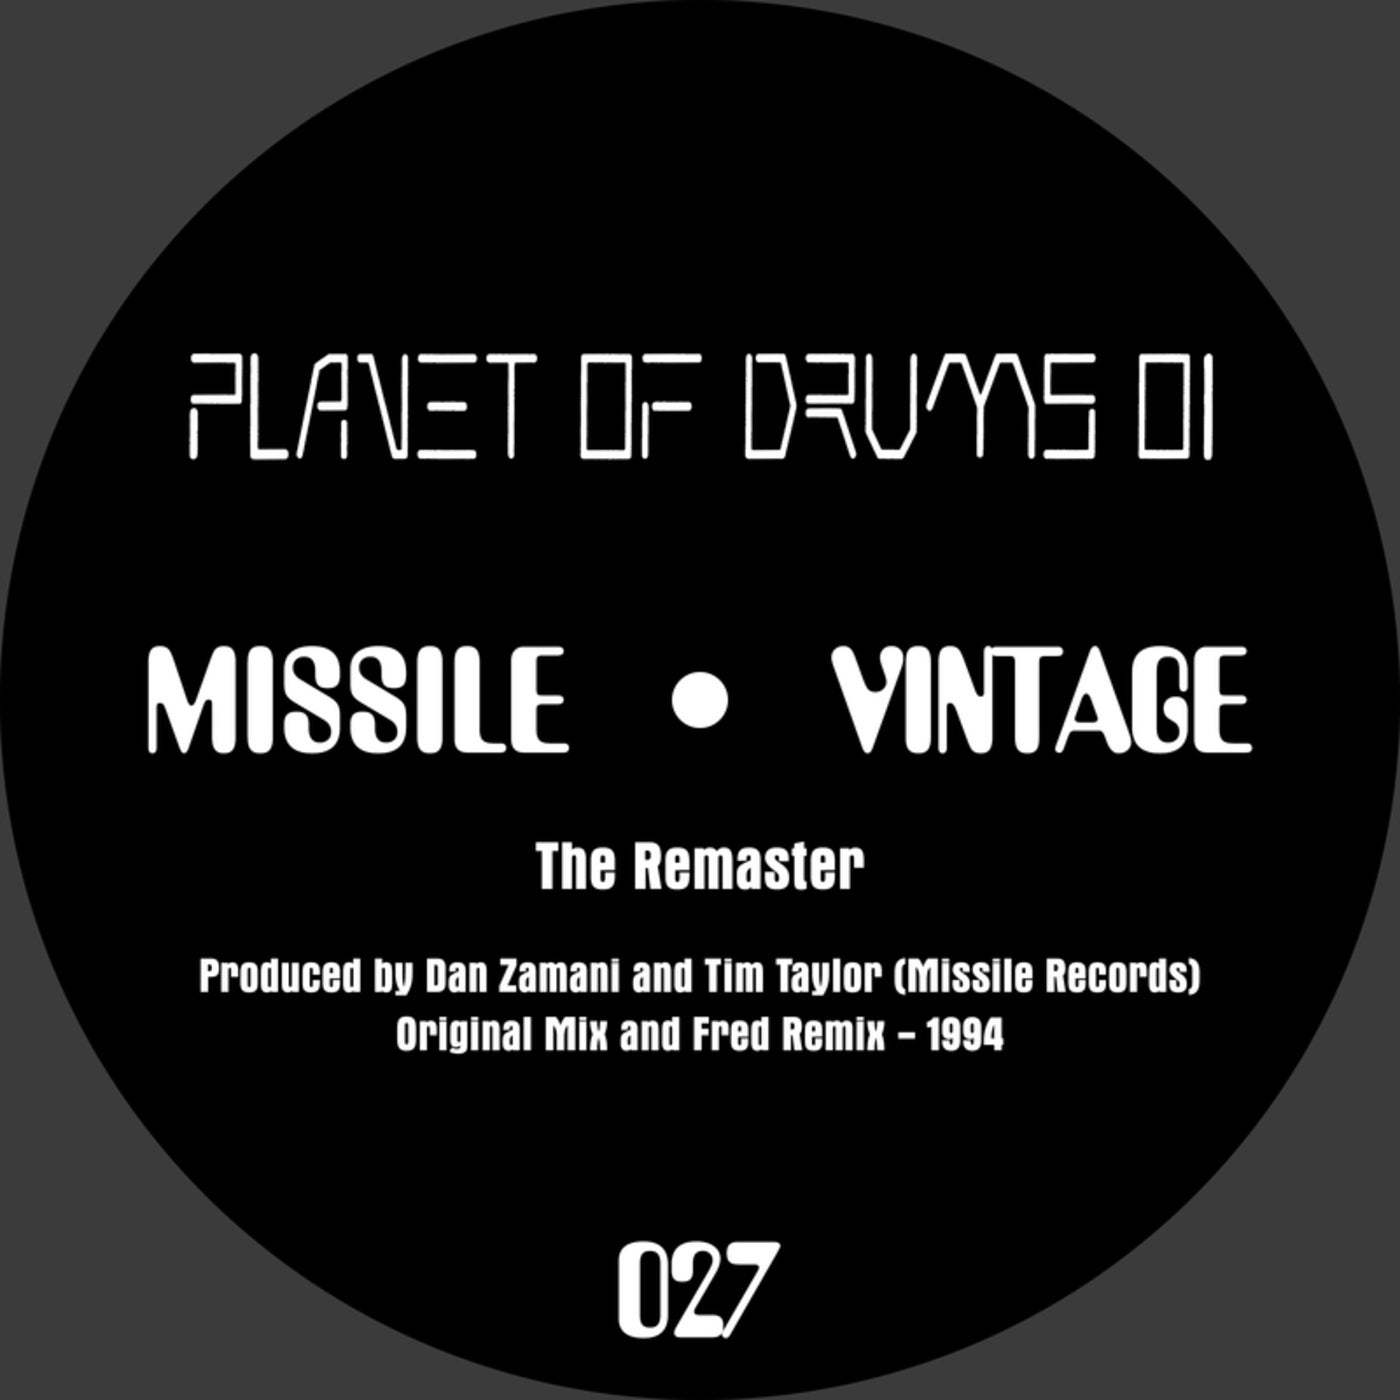 Planet of Drums 01 (The Remaster)